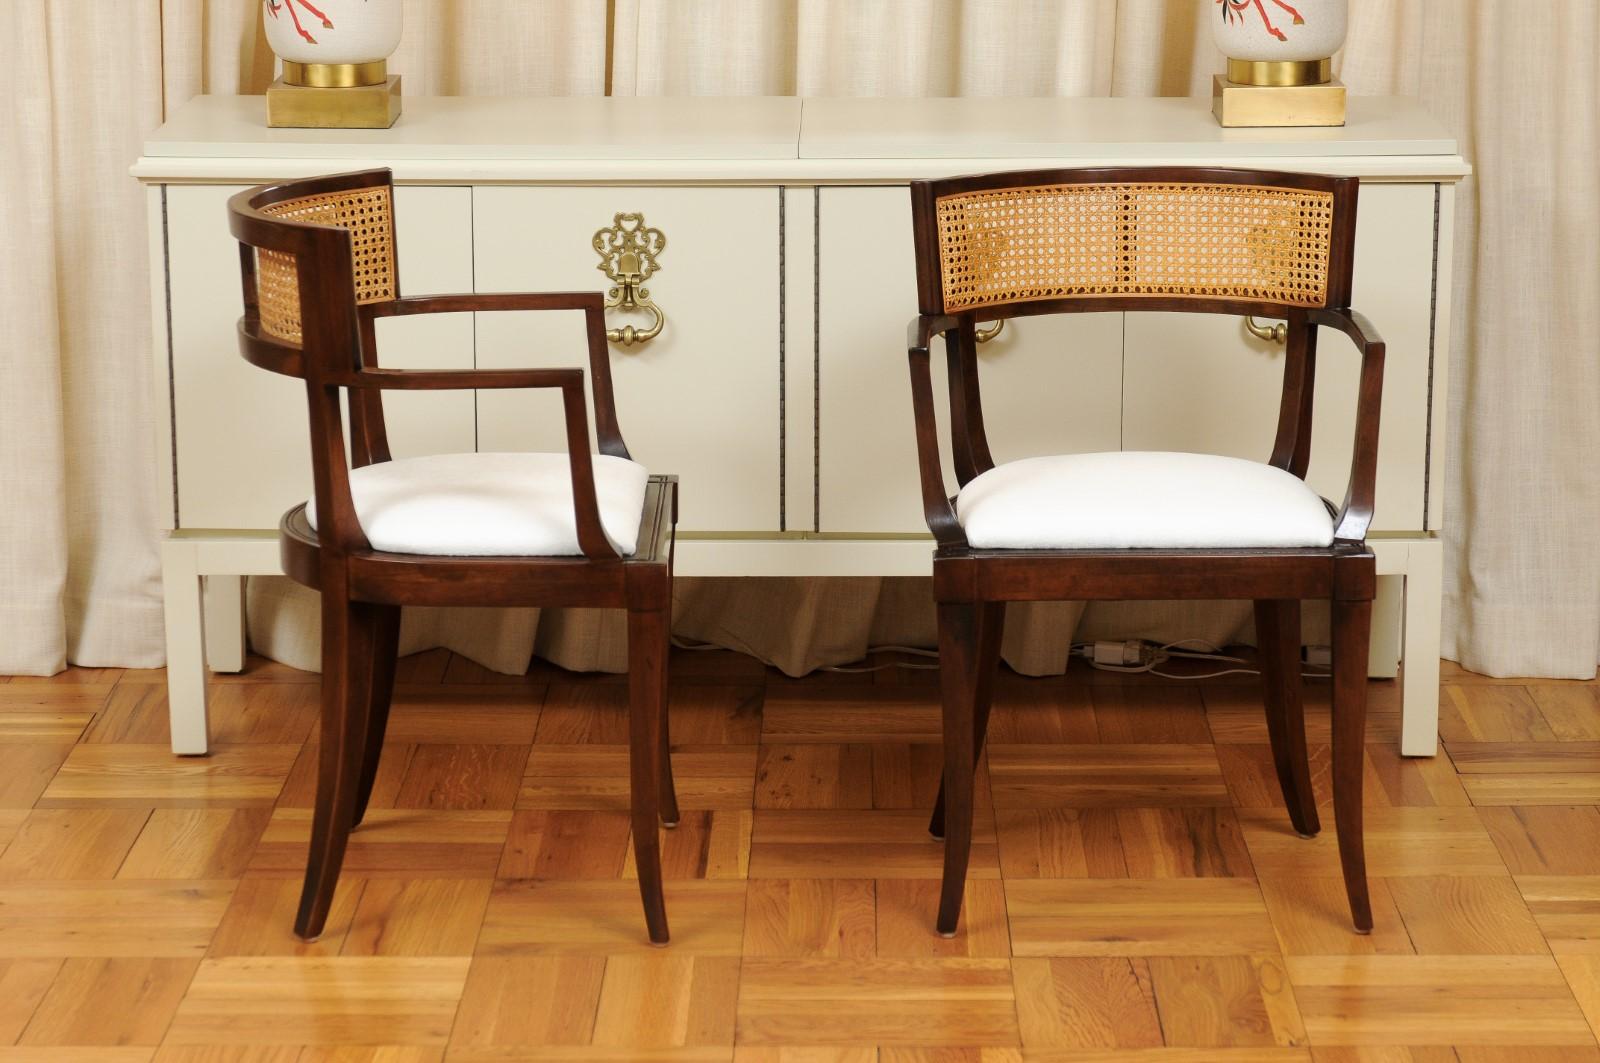 Mid-20th Century All Arms, Exquisite Set of 20 Klismos Cane Dining Chairs by Baker, circa 1958 For Sale